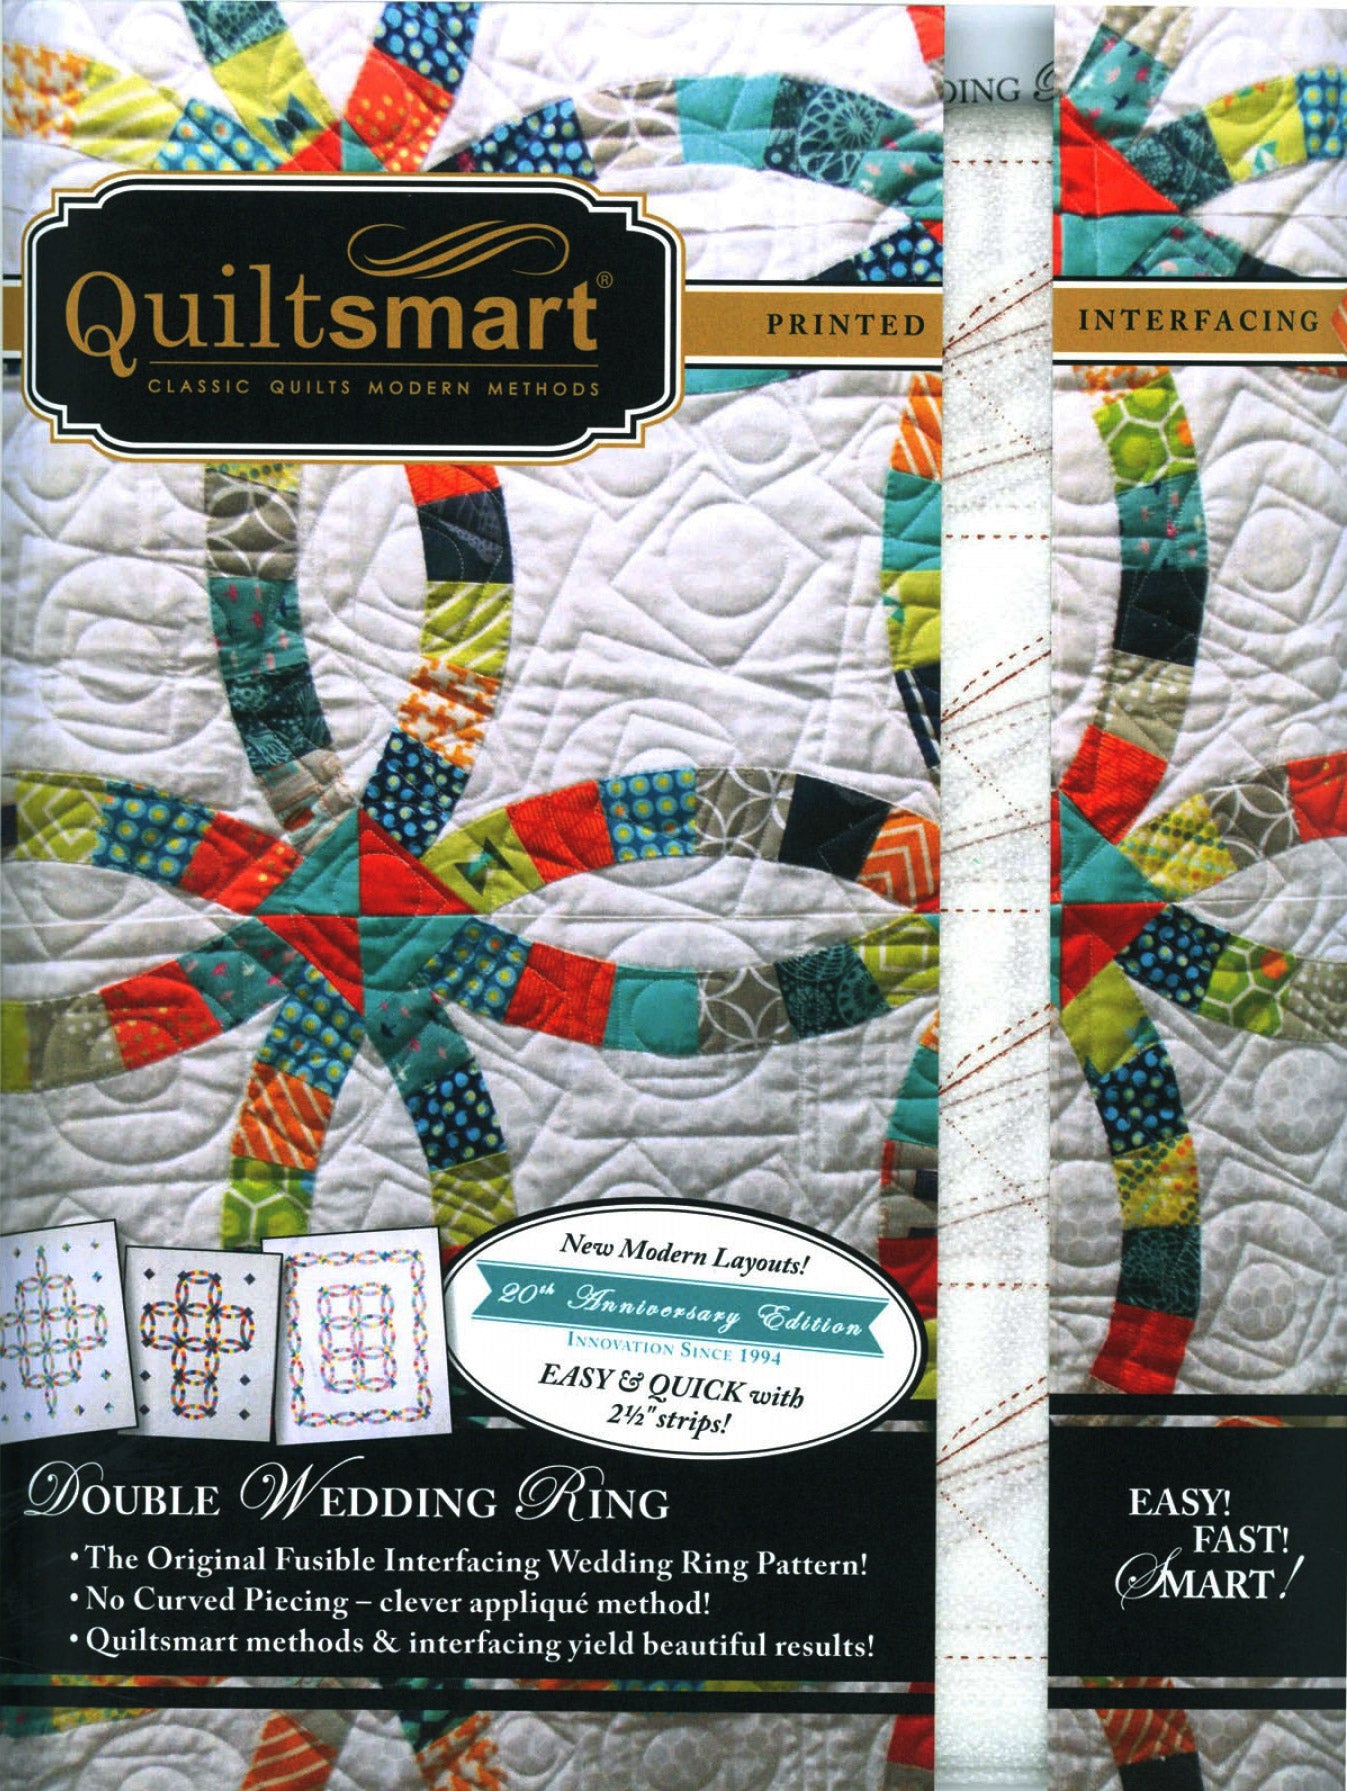 Double Wedding Ring Classic Pack Quilt Pattern with Printed Interfacing by Mattie Rhodes for Quiltsmart